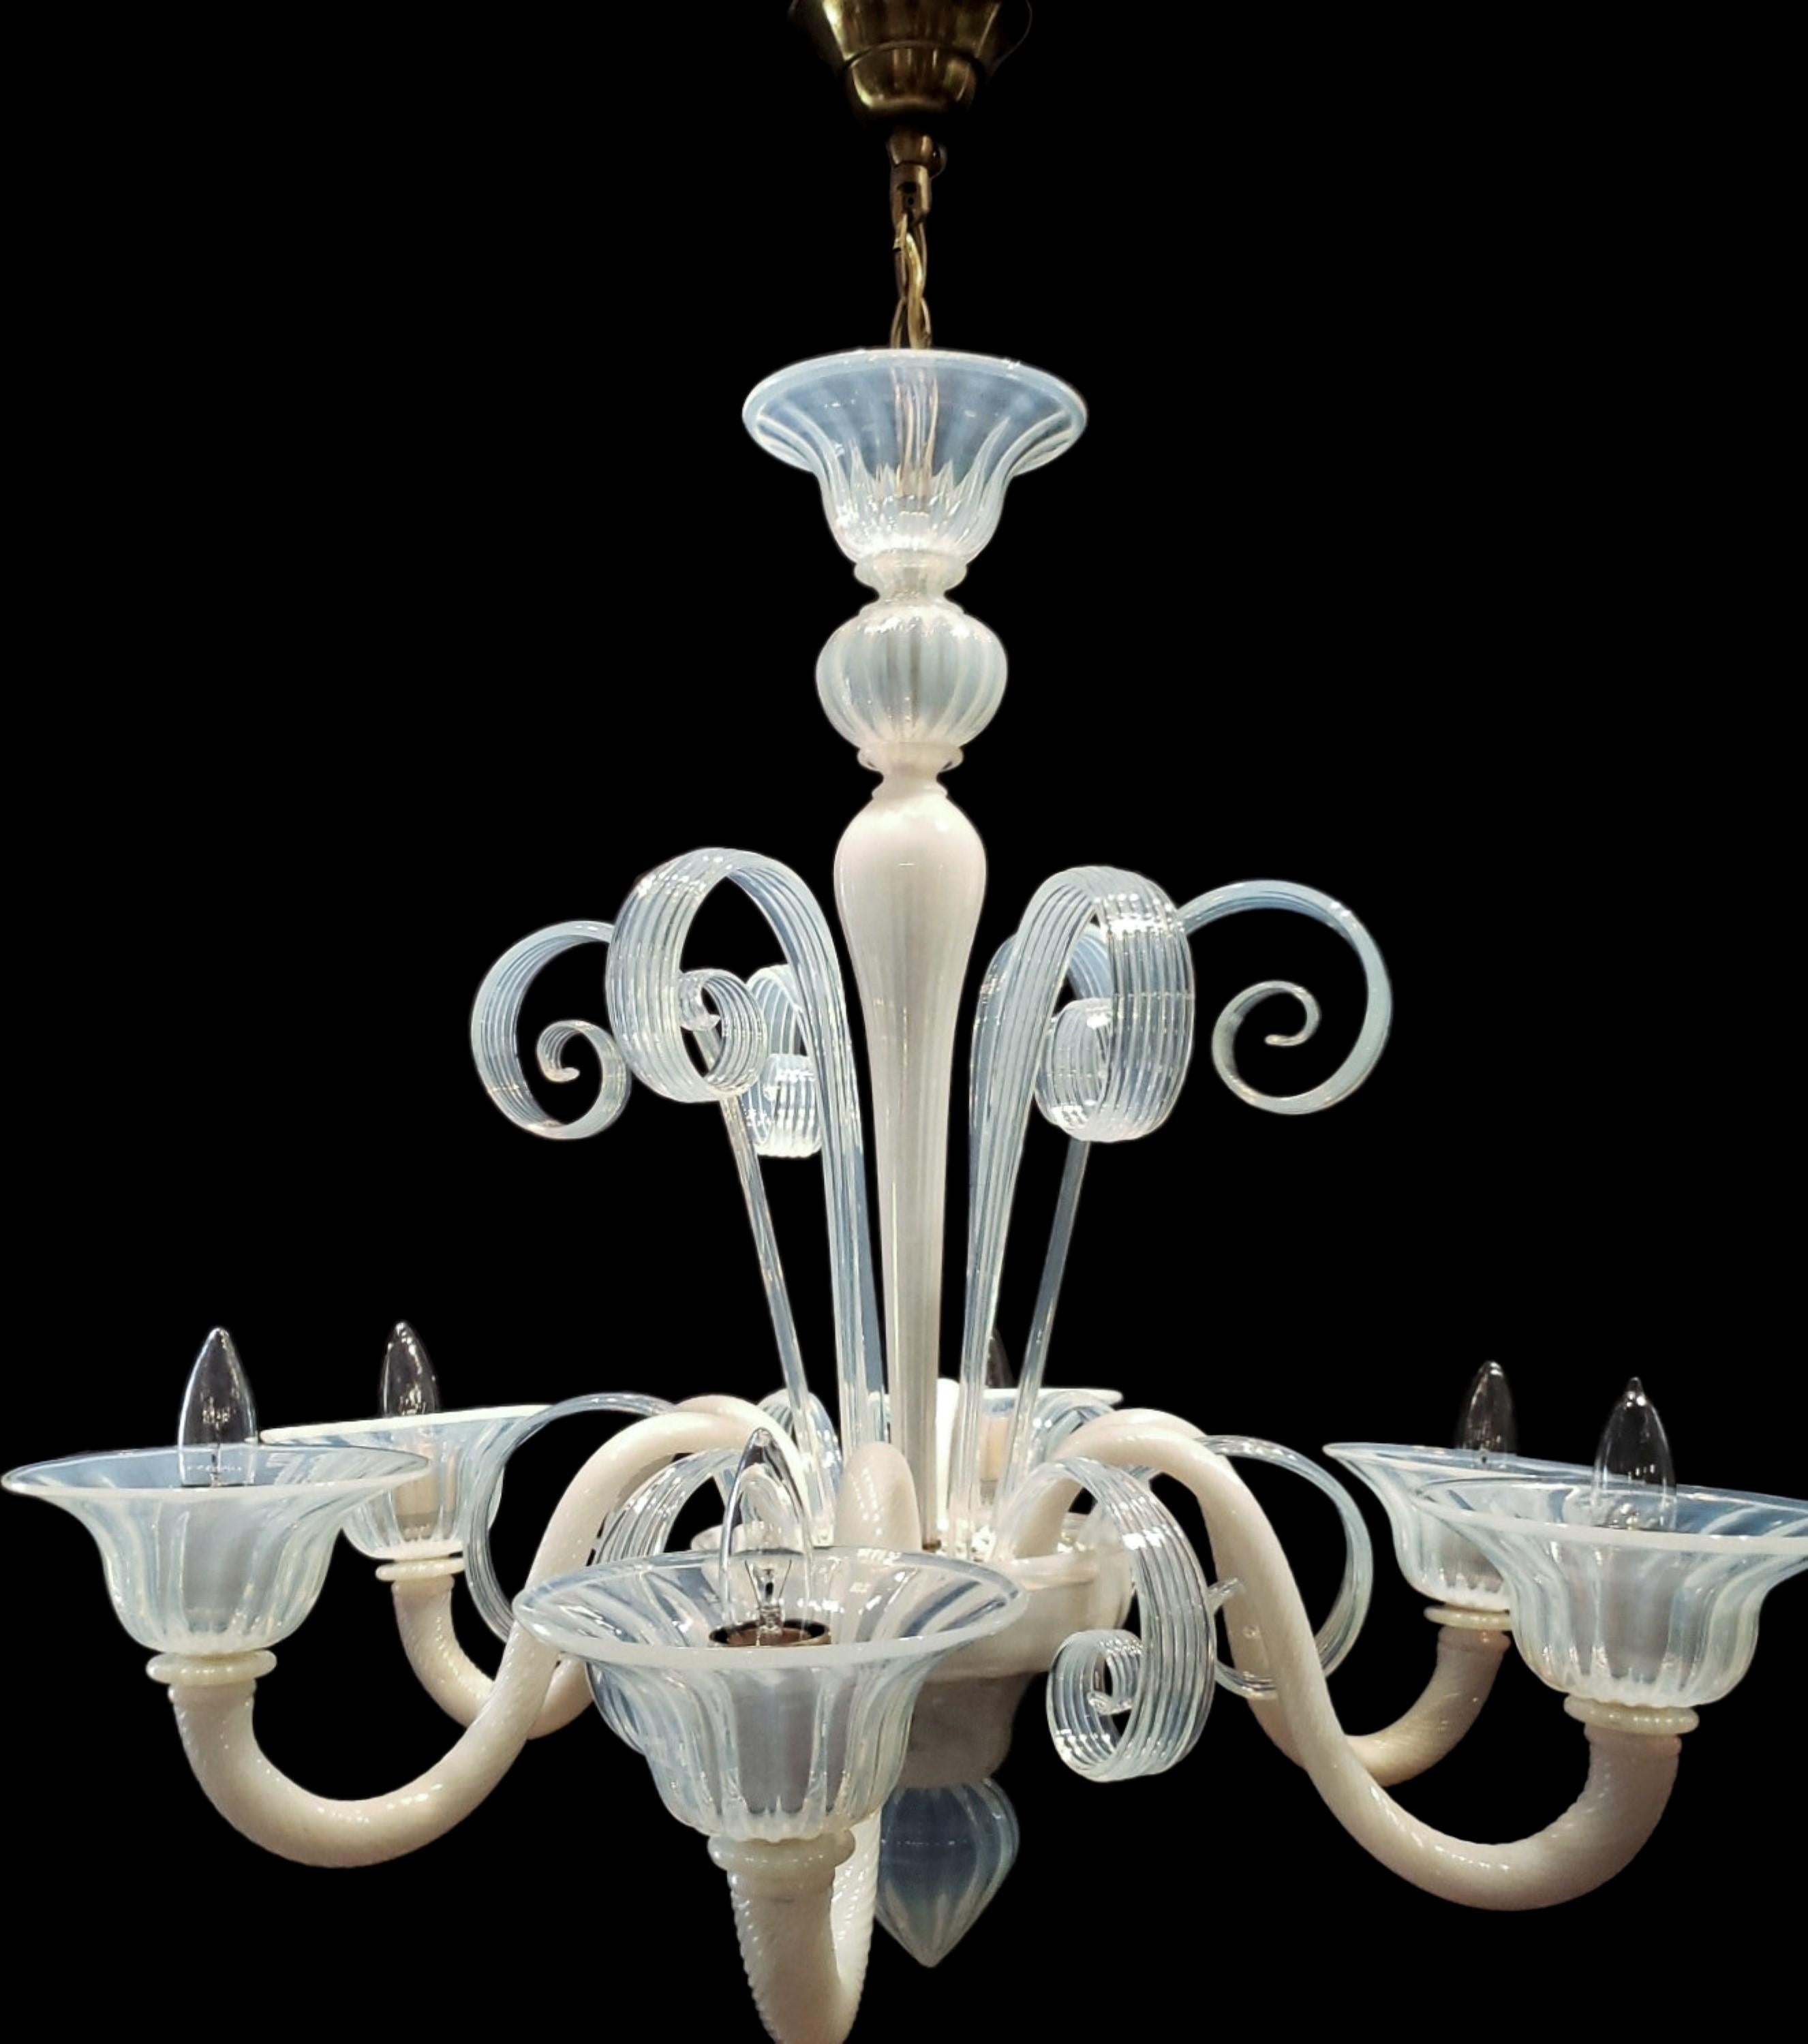 Hand made Murano opaline glass six arm chandelier with curls that flow upward and downward. This comes rewired and ready to install. Ships disassembled.  Cleaned and restored. Please note, this item is located in our Scranton, PA location.